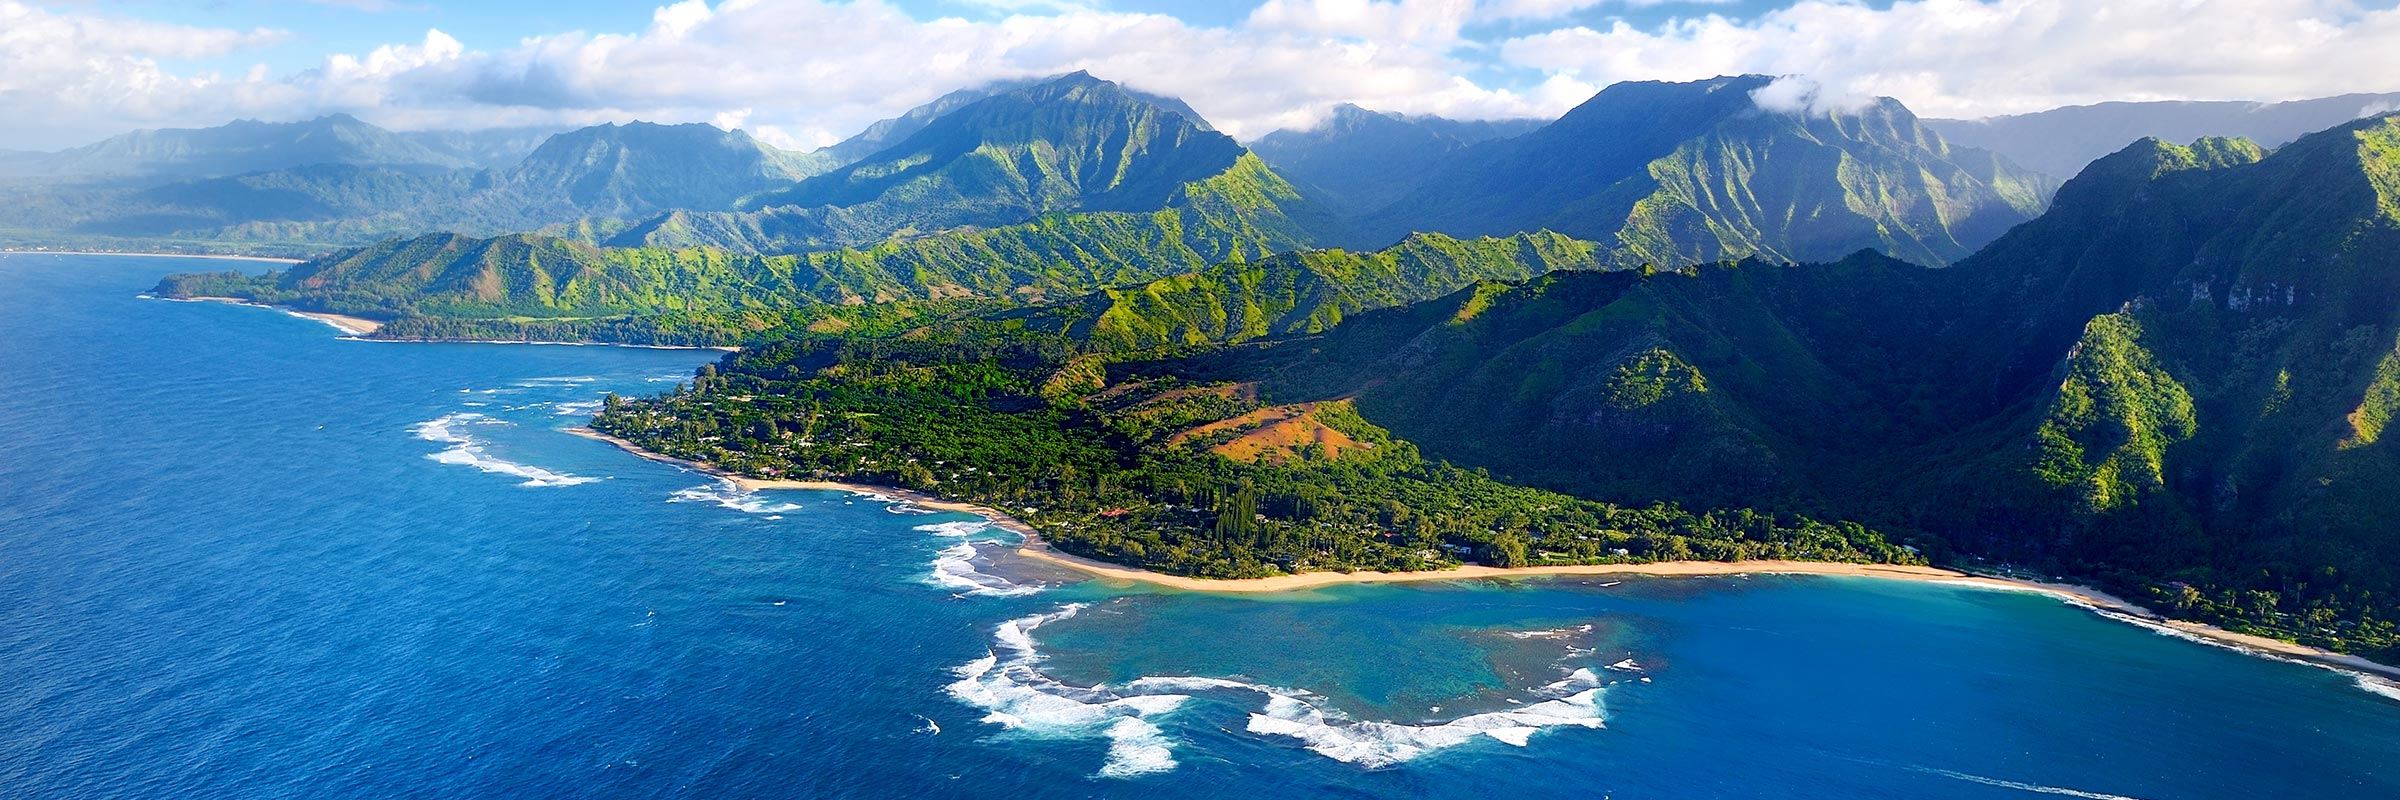 Best Time to Visit Hawaii   Climate Guide   Audley Travel